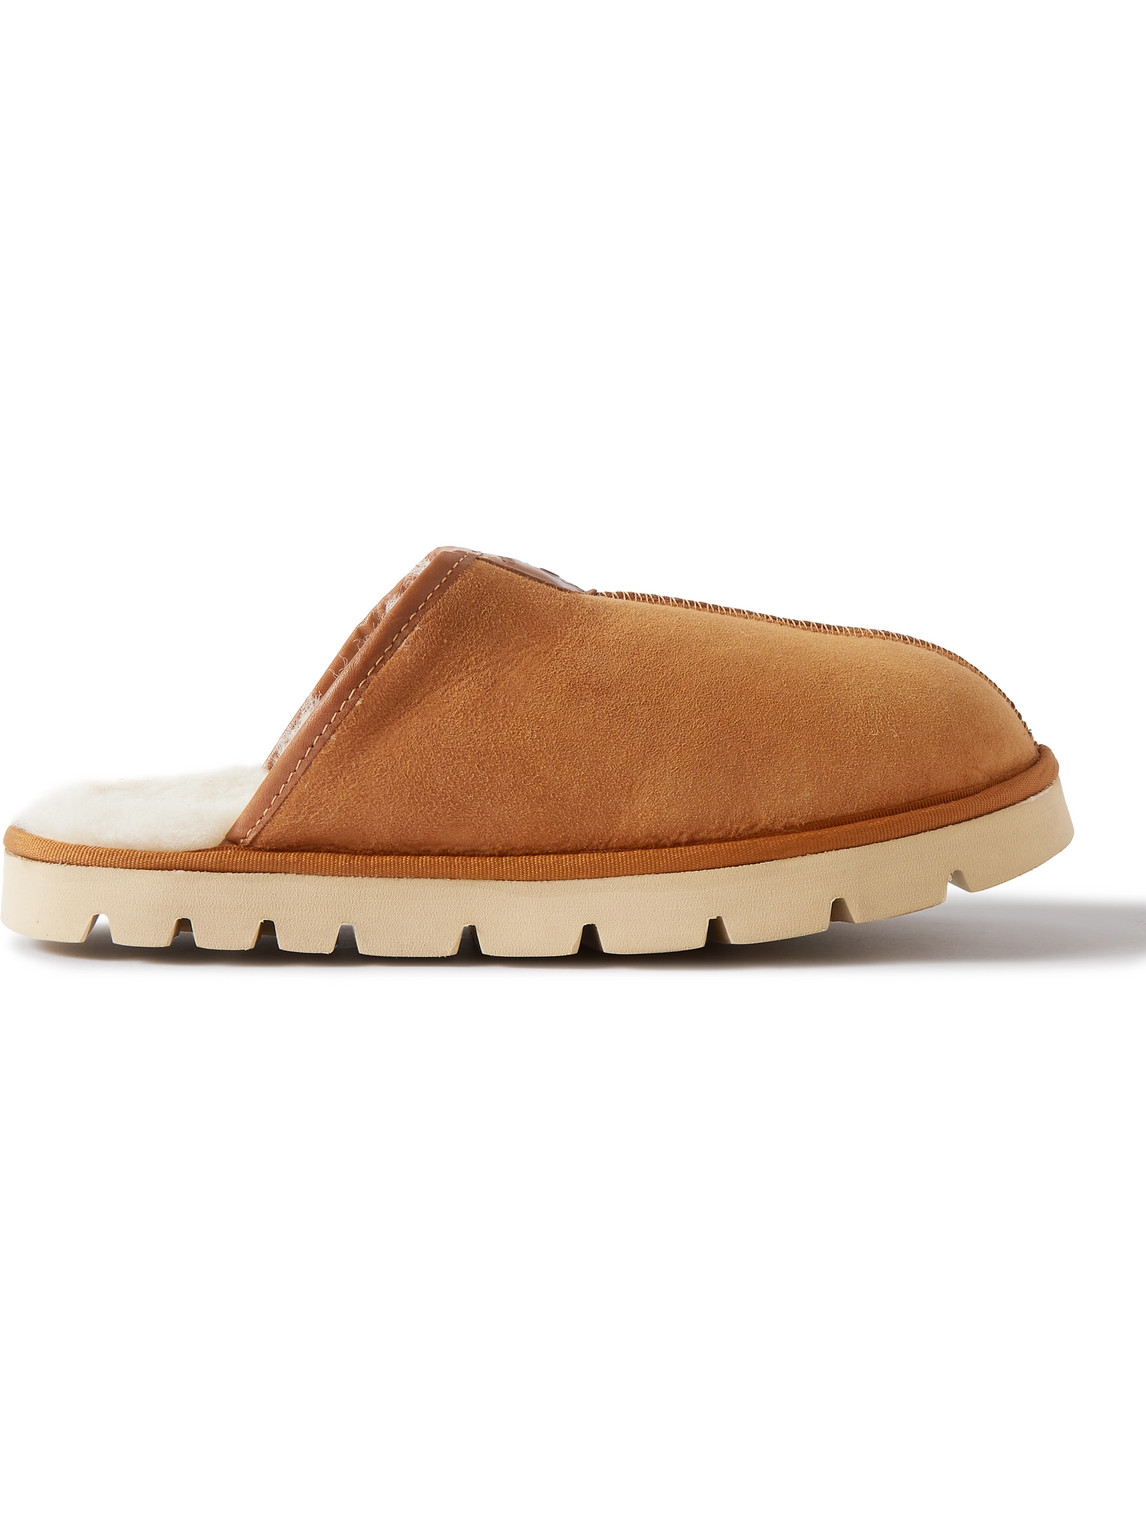 Grenson Wainwright Shearling-lined Suede Slippers In Brown